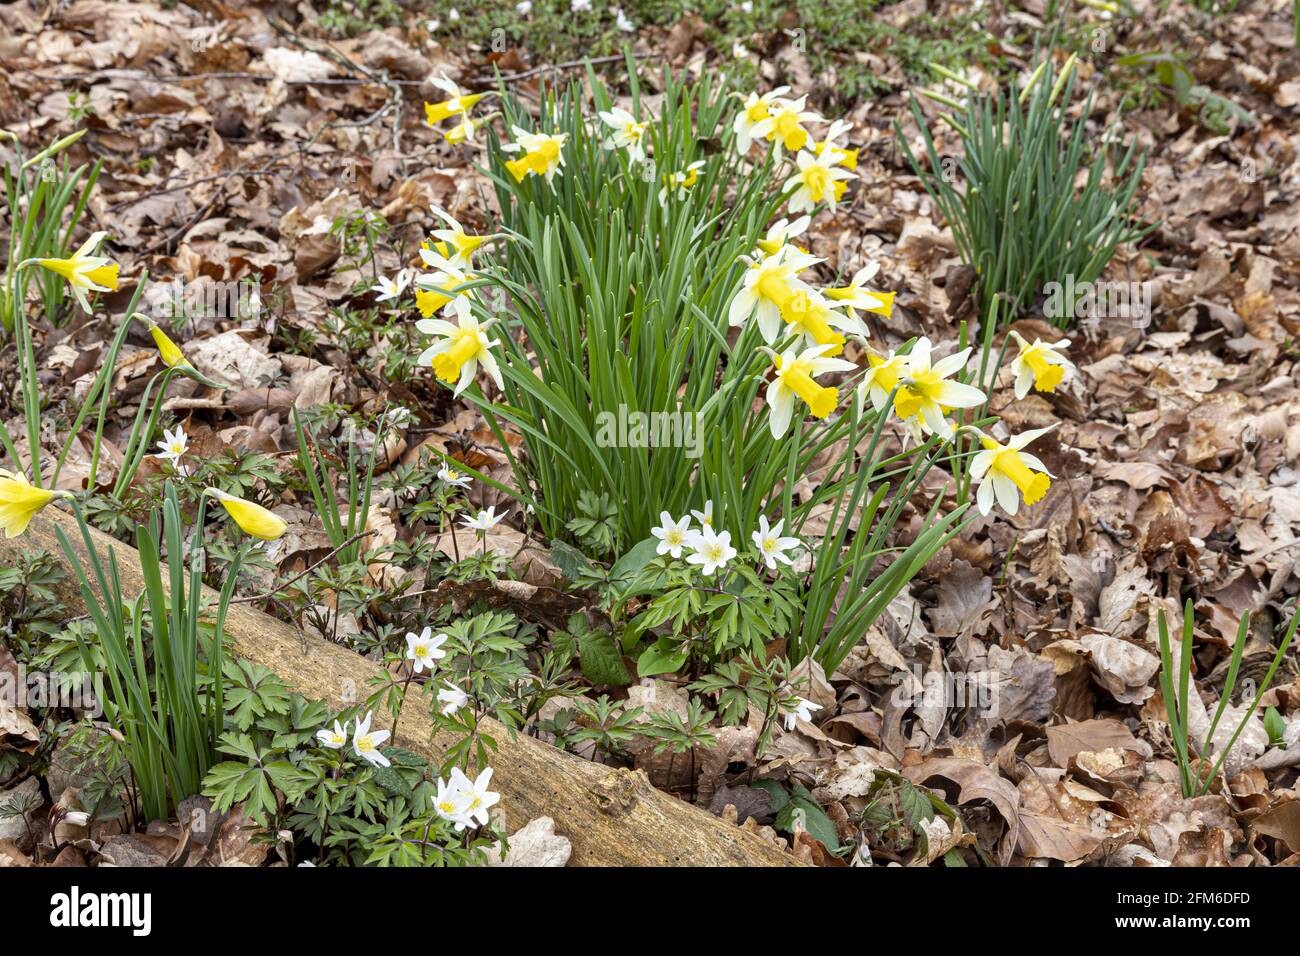 Wild daffodils (Narcissus pseudonarcissus) and wood anemones (Anemone nemorosa) in early spring in Betty Daws Wood at Four Oaks, near Kempley, Glouces Stock Photo